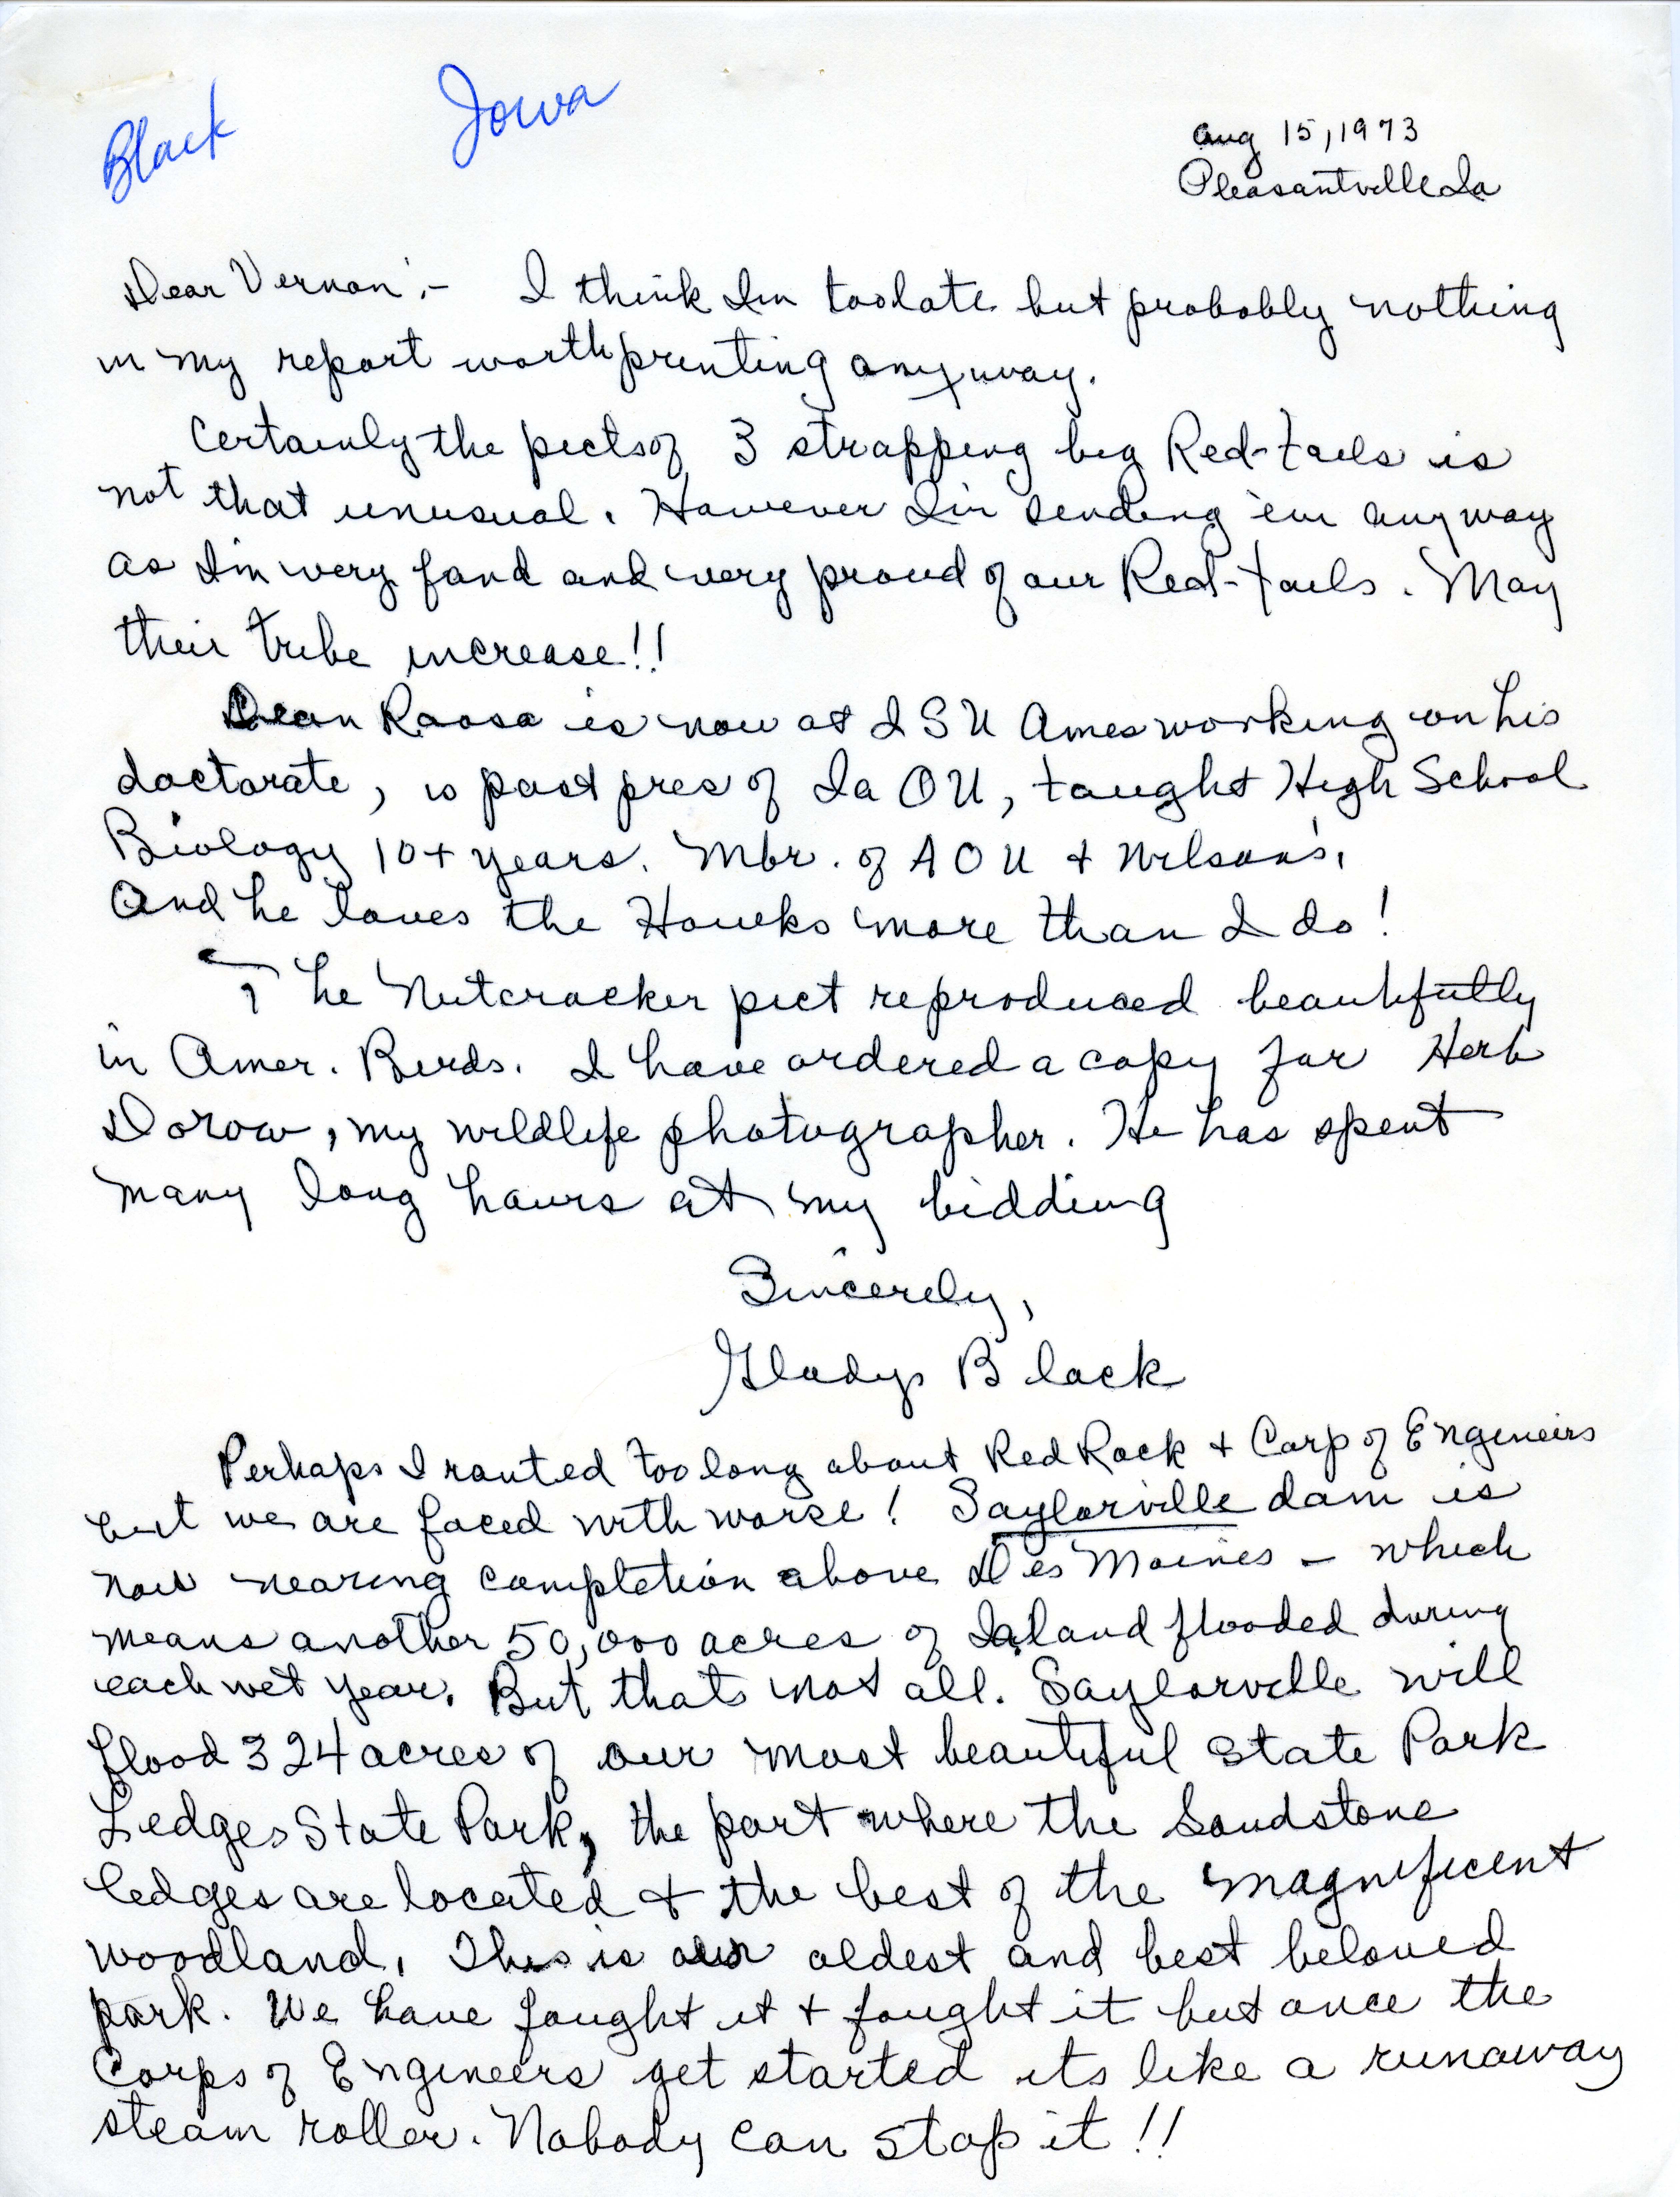 Gladys Black letter to Vernon M. Kleen regarding changes in habitat and birds sighted at the Red Rock Refuge and Pleasantville, Iowa area, August 15, 1973